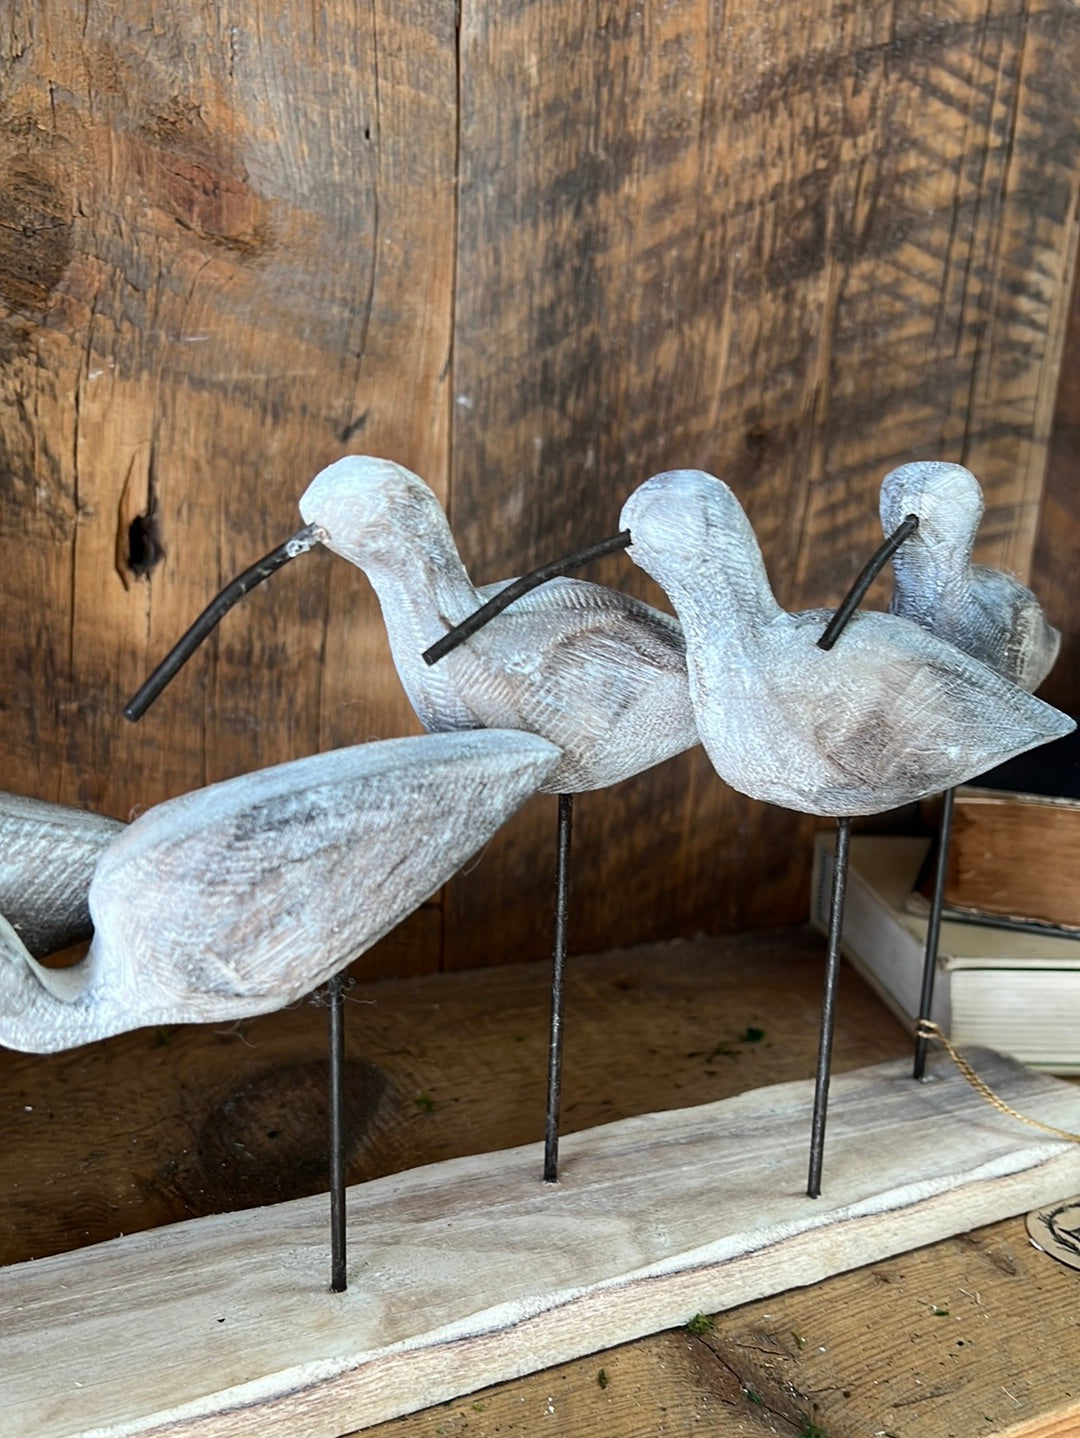 Whitewashed Shore Birds 5 on Wood and Metal 13"L x 7"H